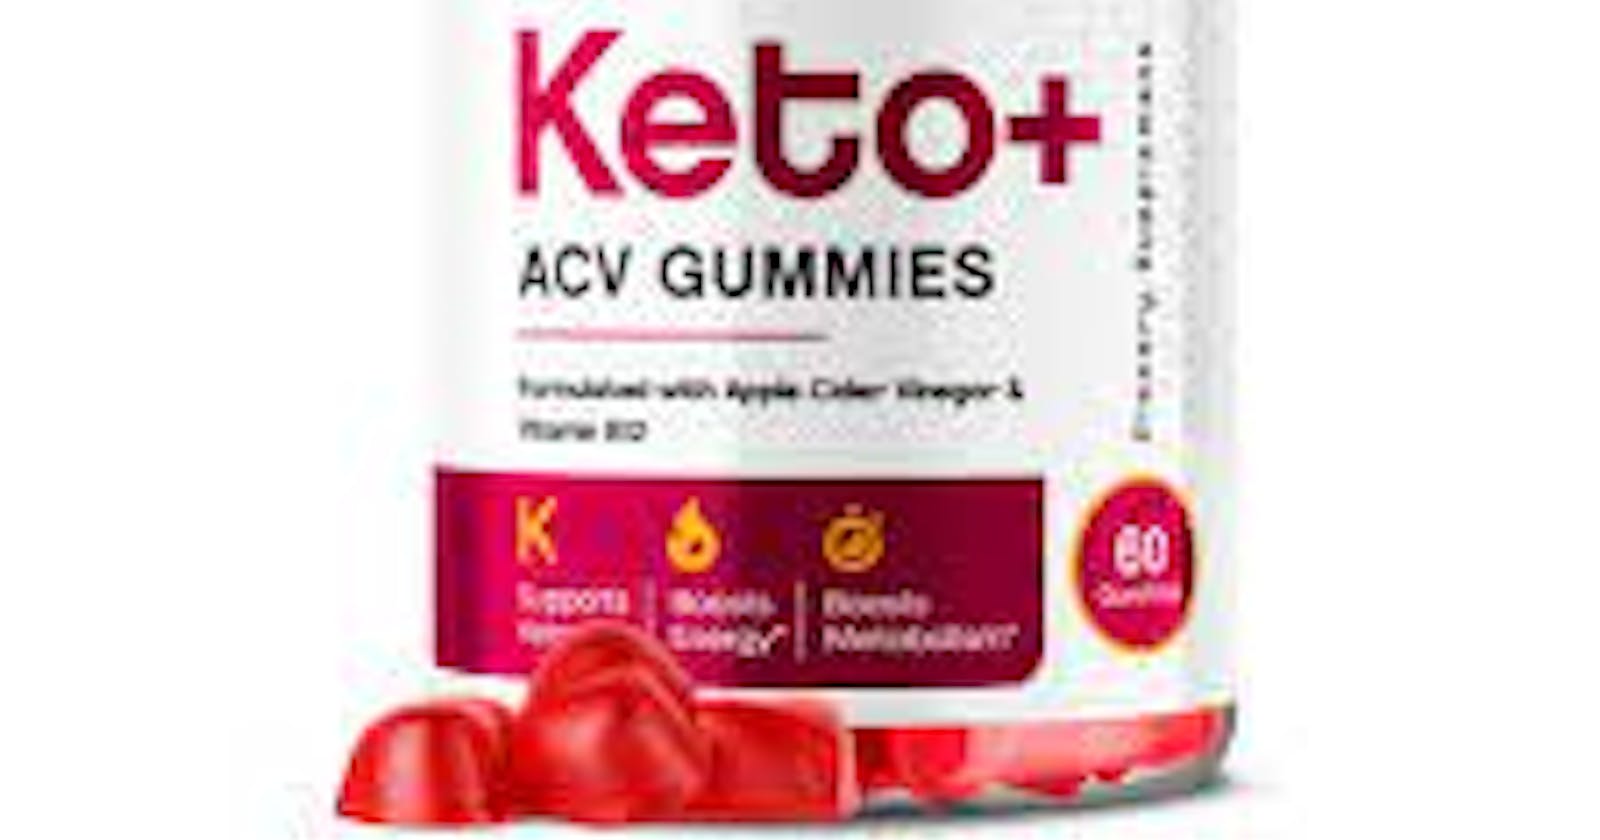 x10 boost keto acv gummies Reviews (Fraudulent Exposed) Is It Really Work?